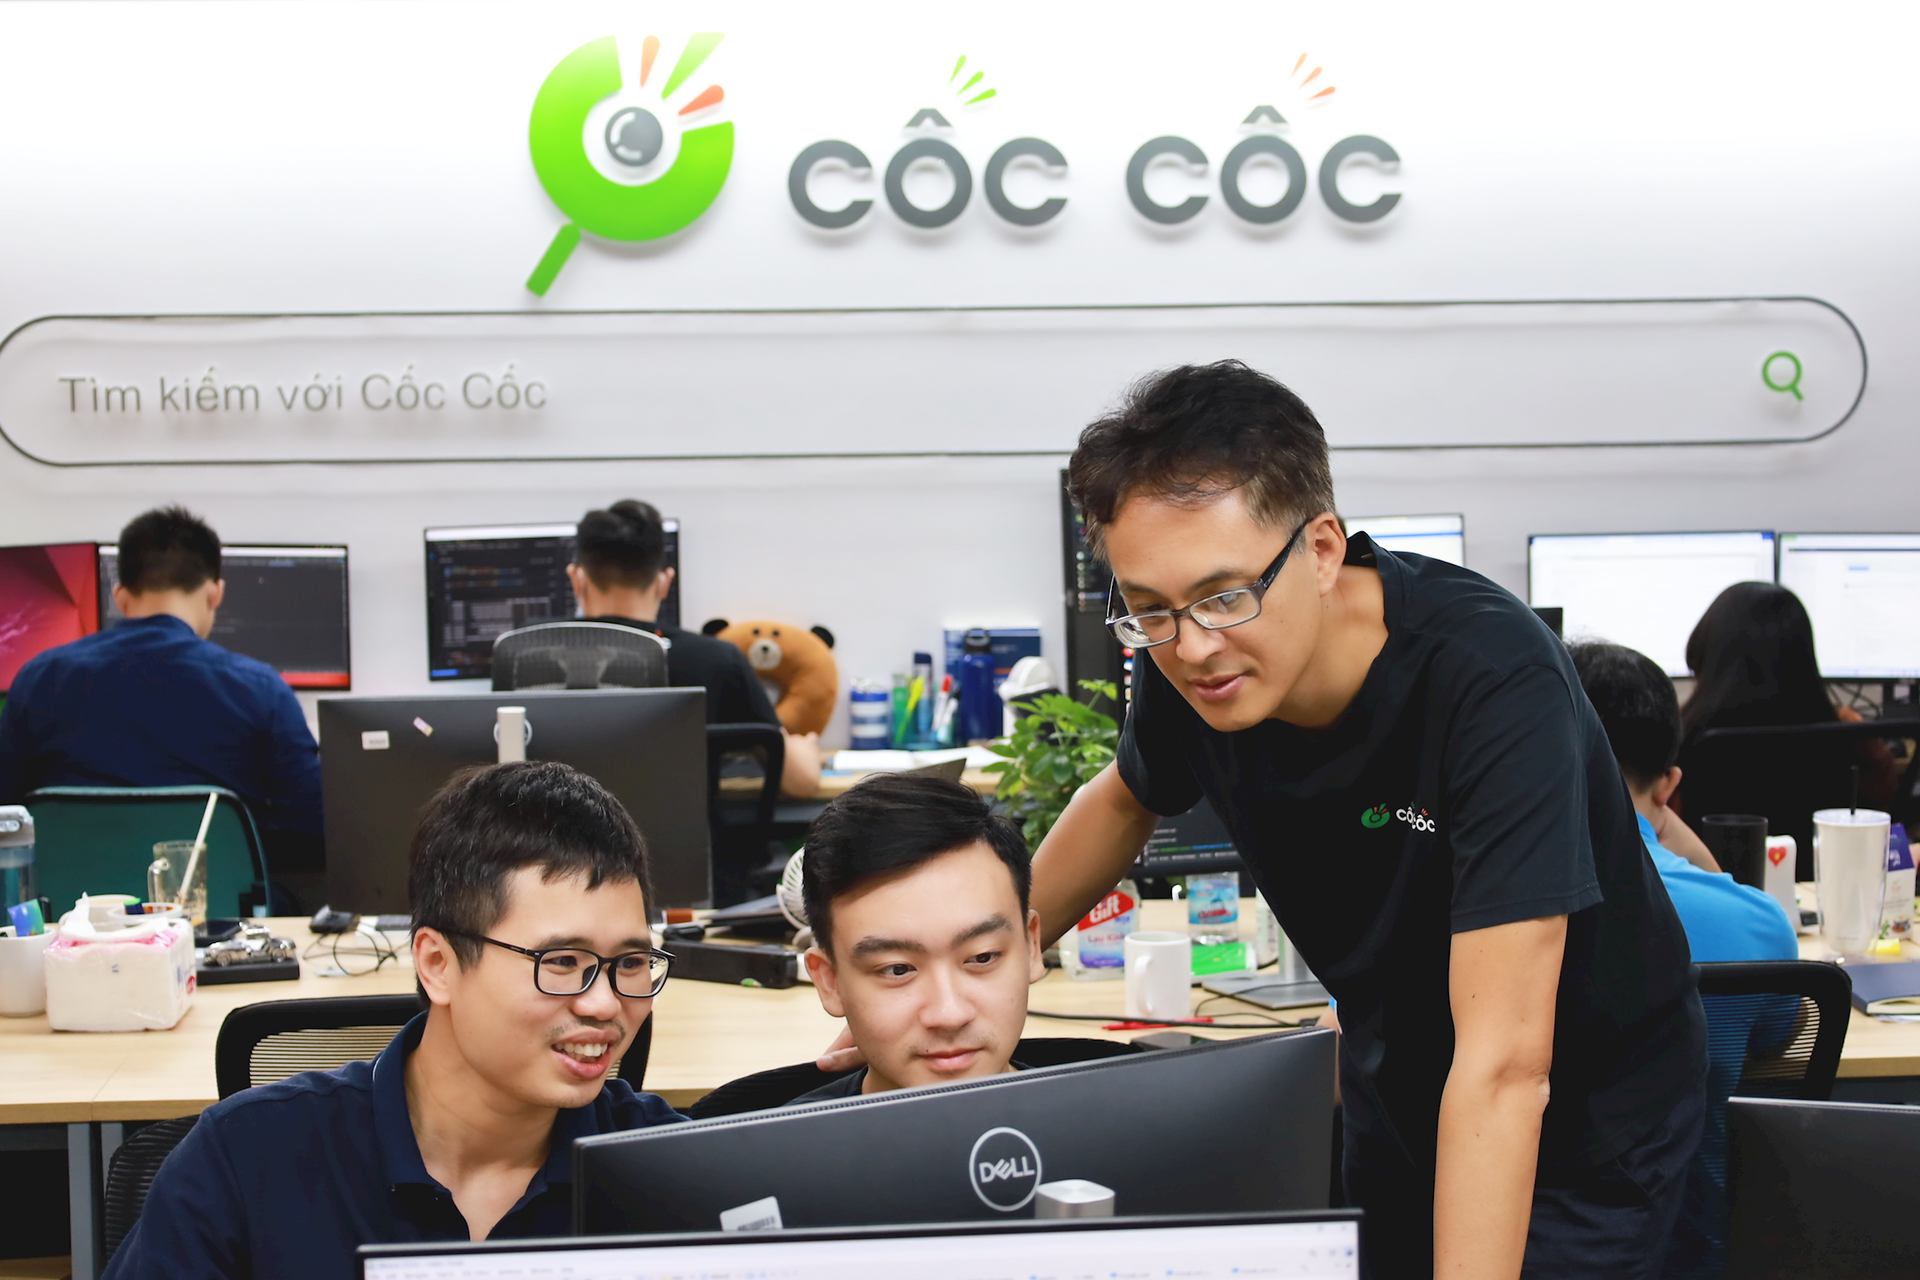 ceo-coc-coc-ong-nguyen-vu-anh-2-.png